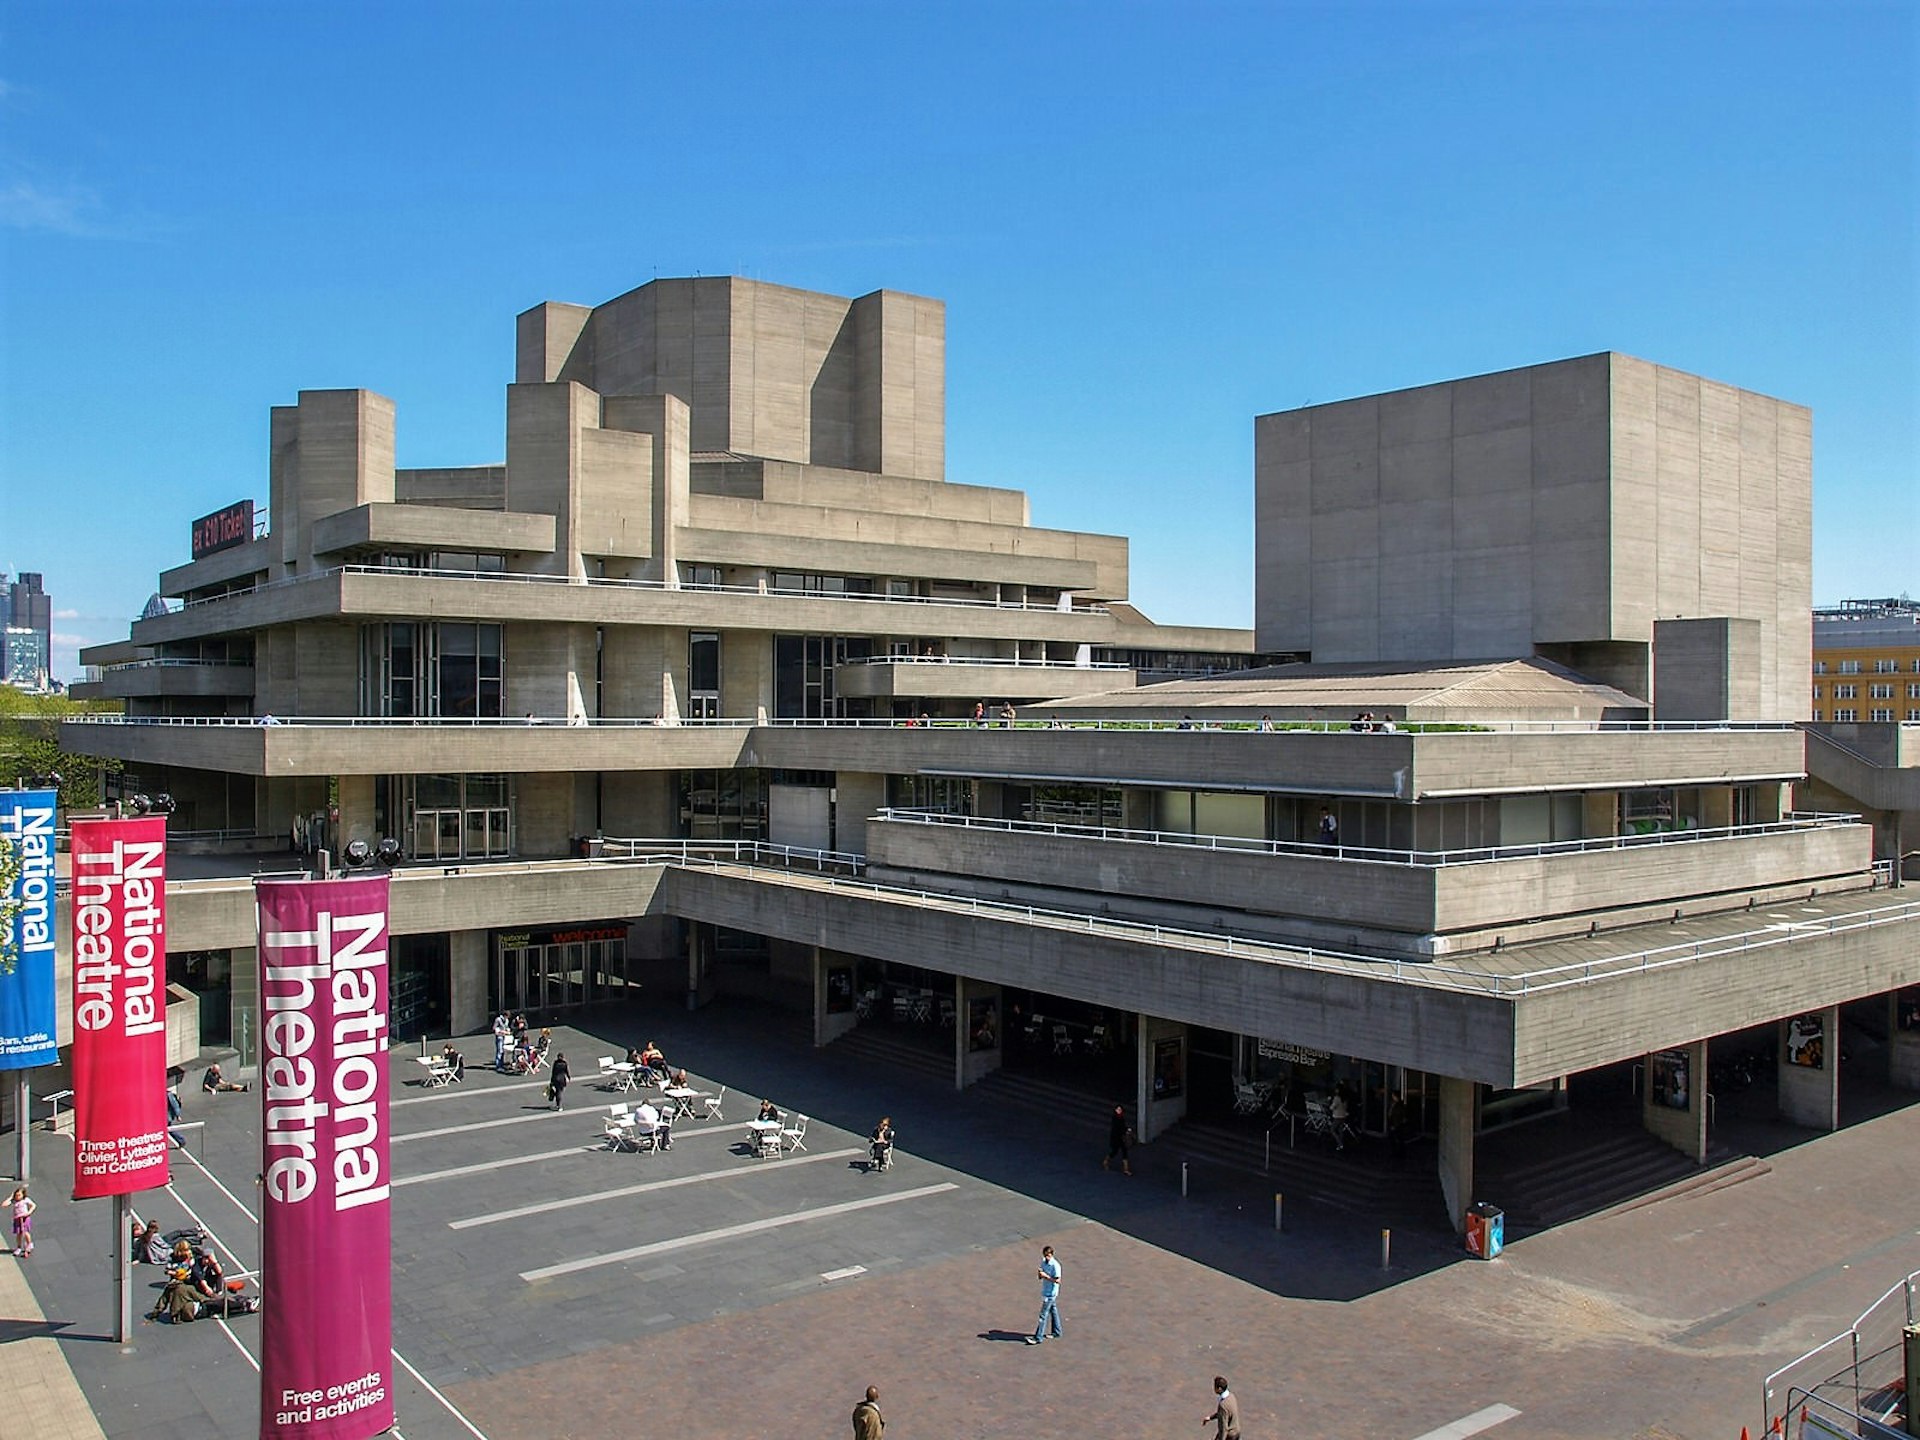 The Brutalist exterior of the National Theatre.